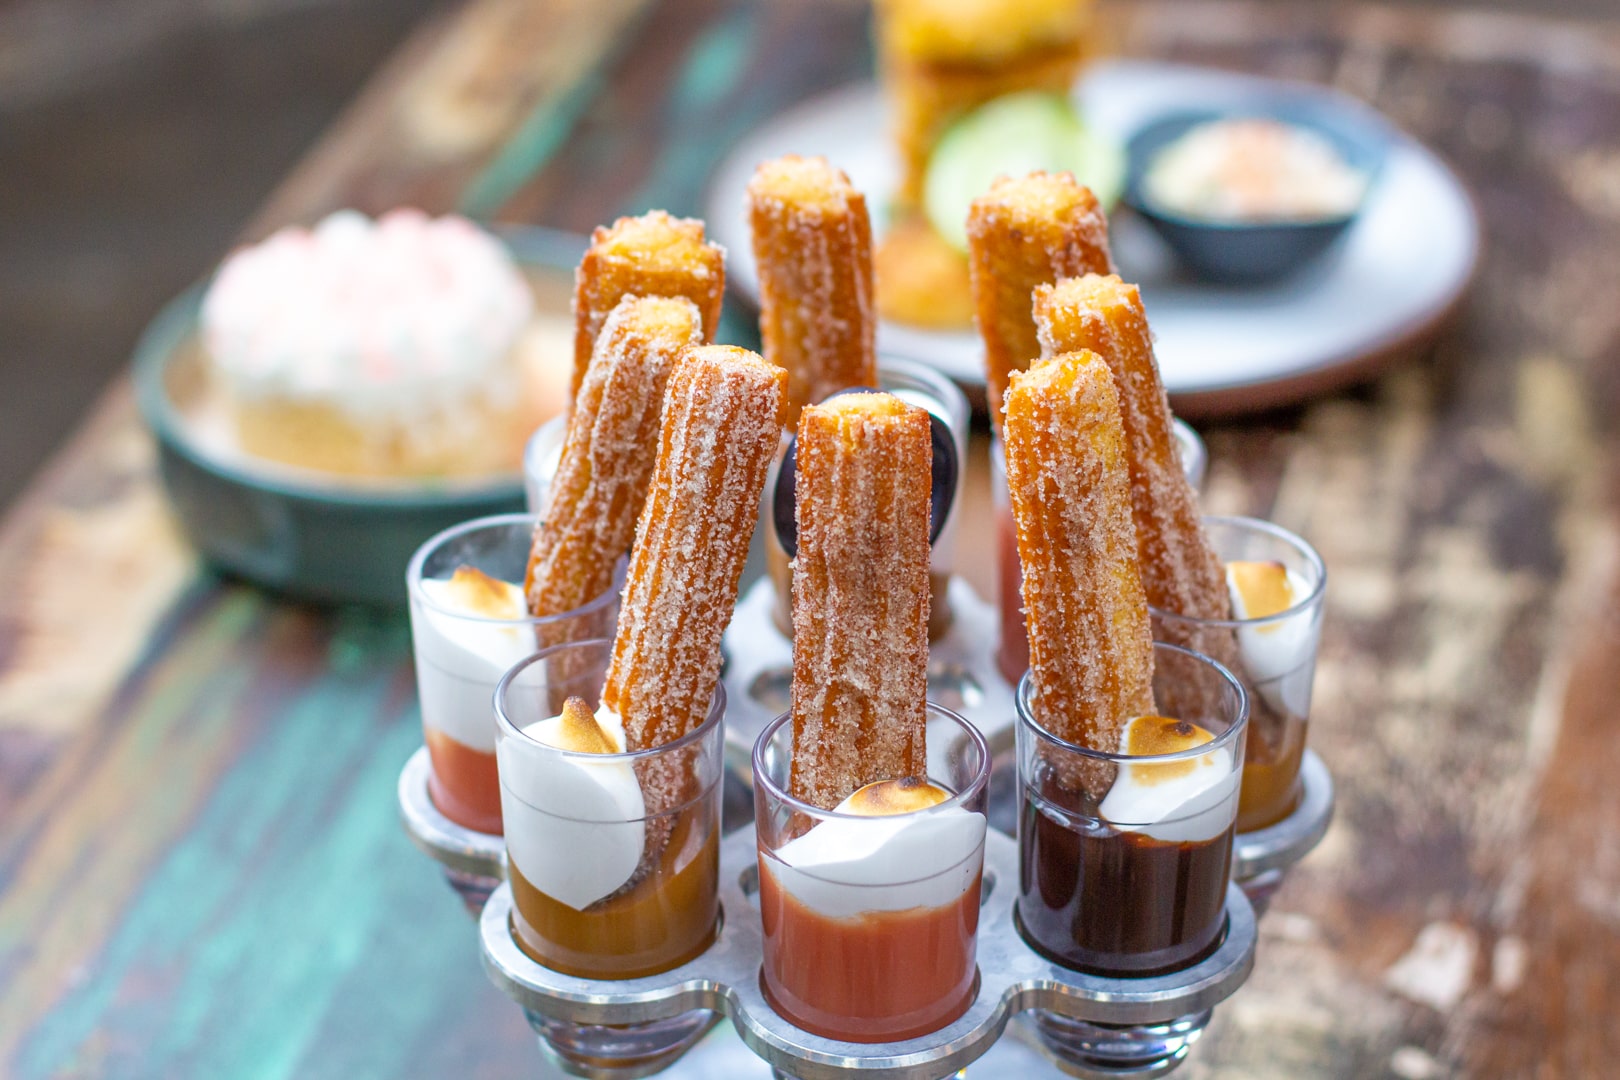 Churrolette agave tasting at Morgan MFG things to do in Chicago this march